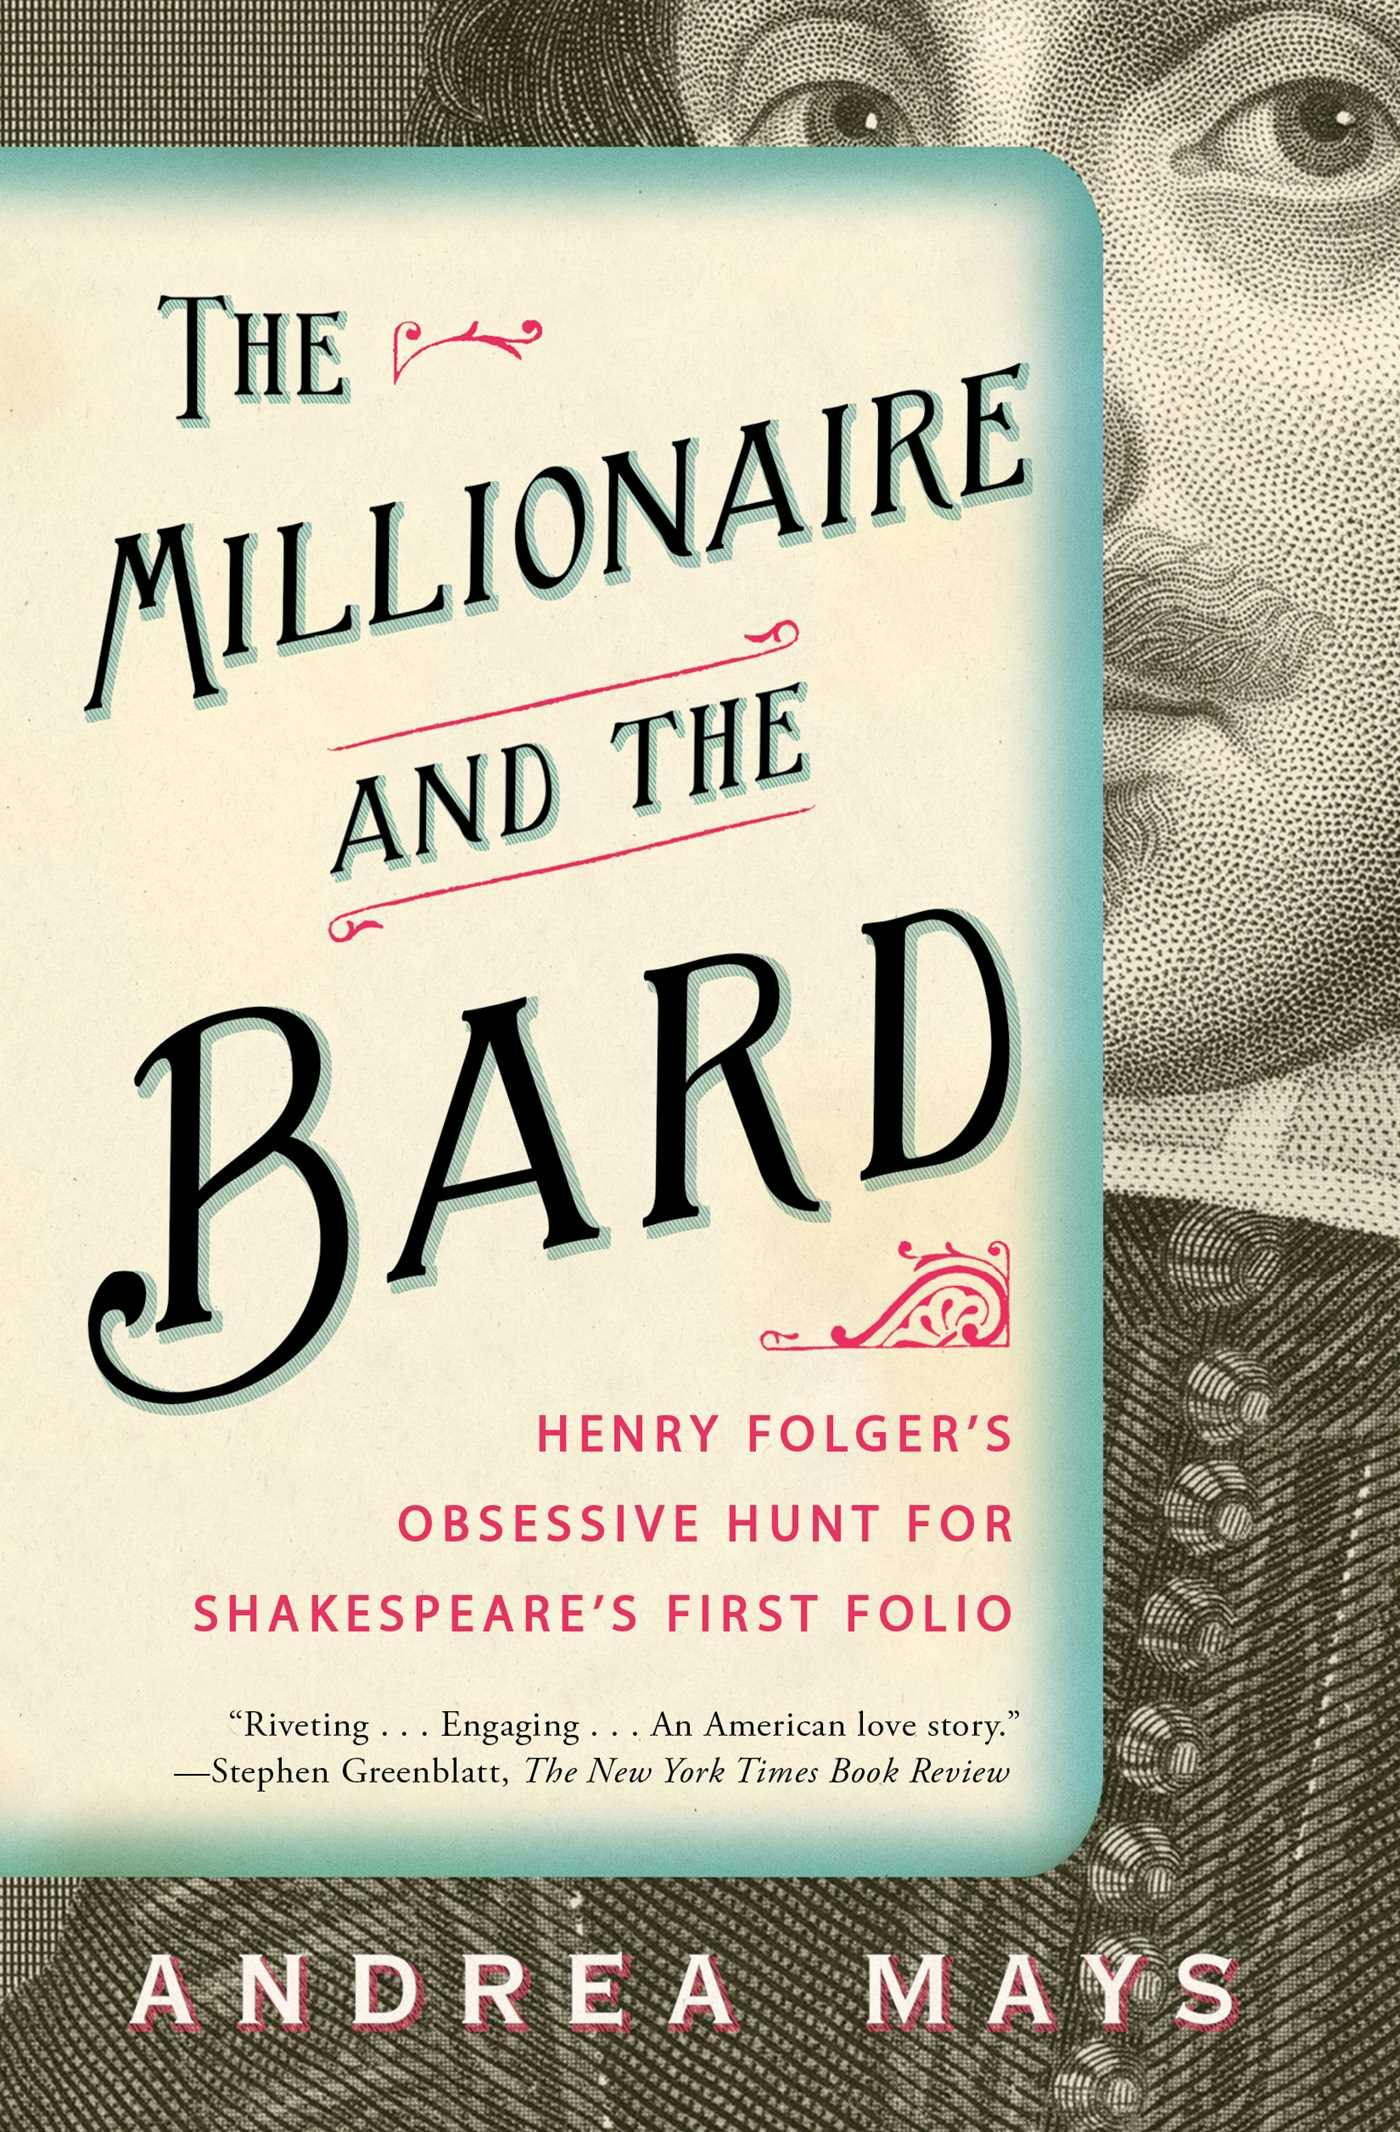 The Millionaire and the Bard: Henry Folger's Obsessive Hunt for Shakespeare's First Folio - Andrea Mays